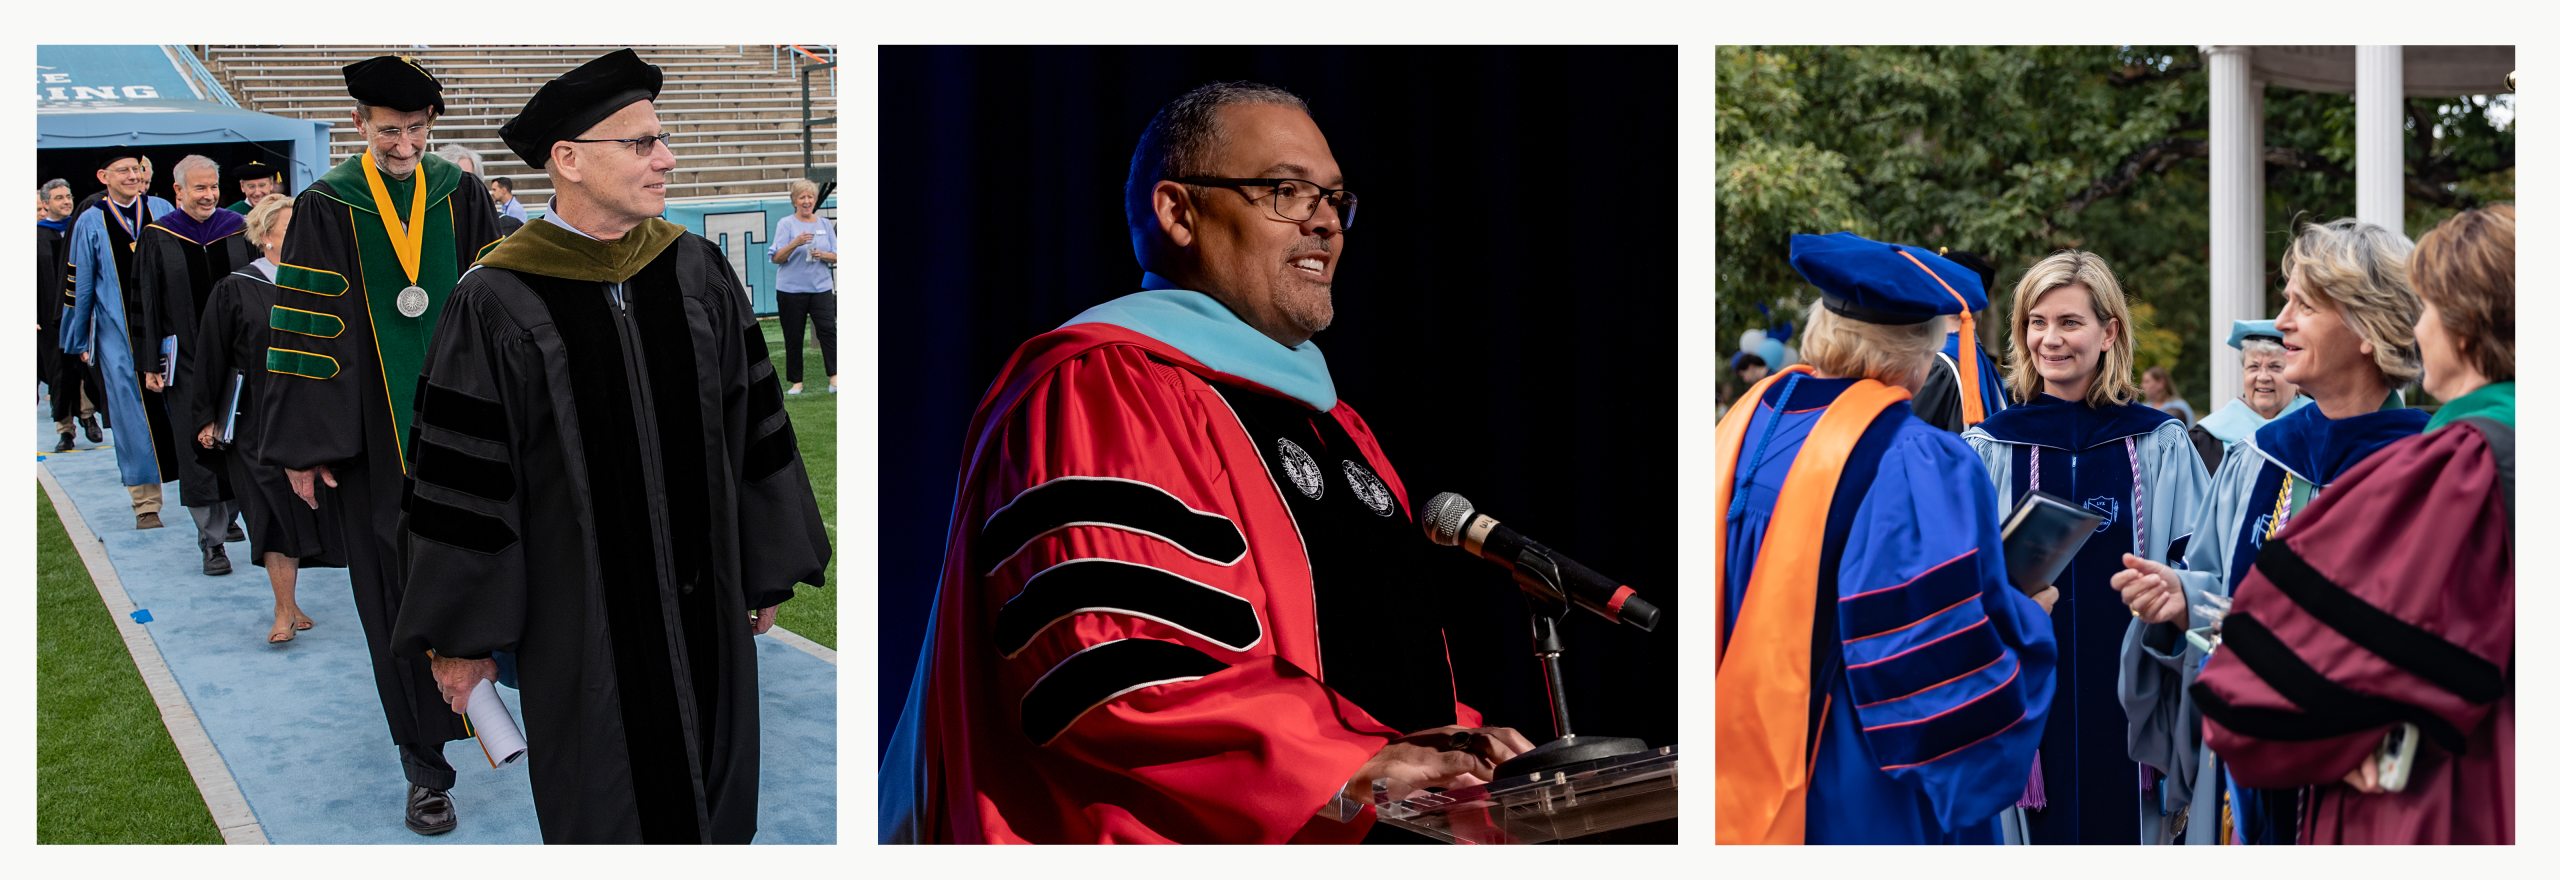 Three-photo collage of faculty members at past Commencement ceremonies and University events.